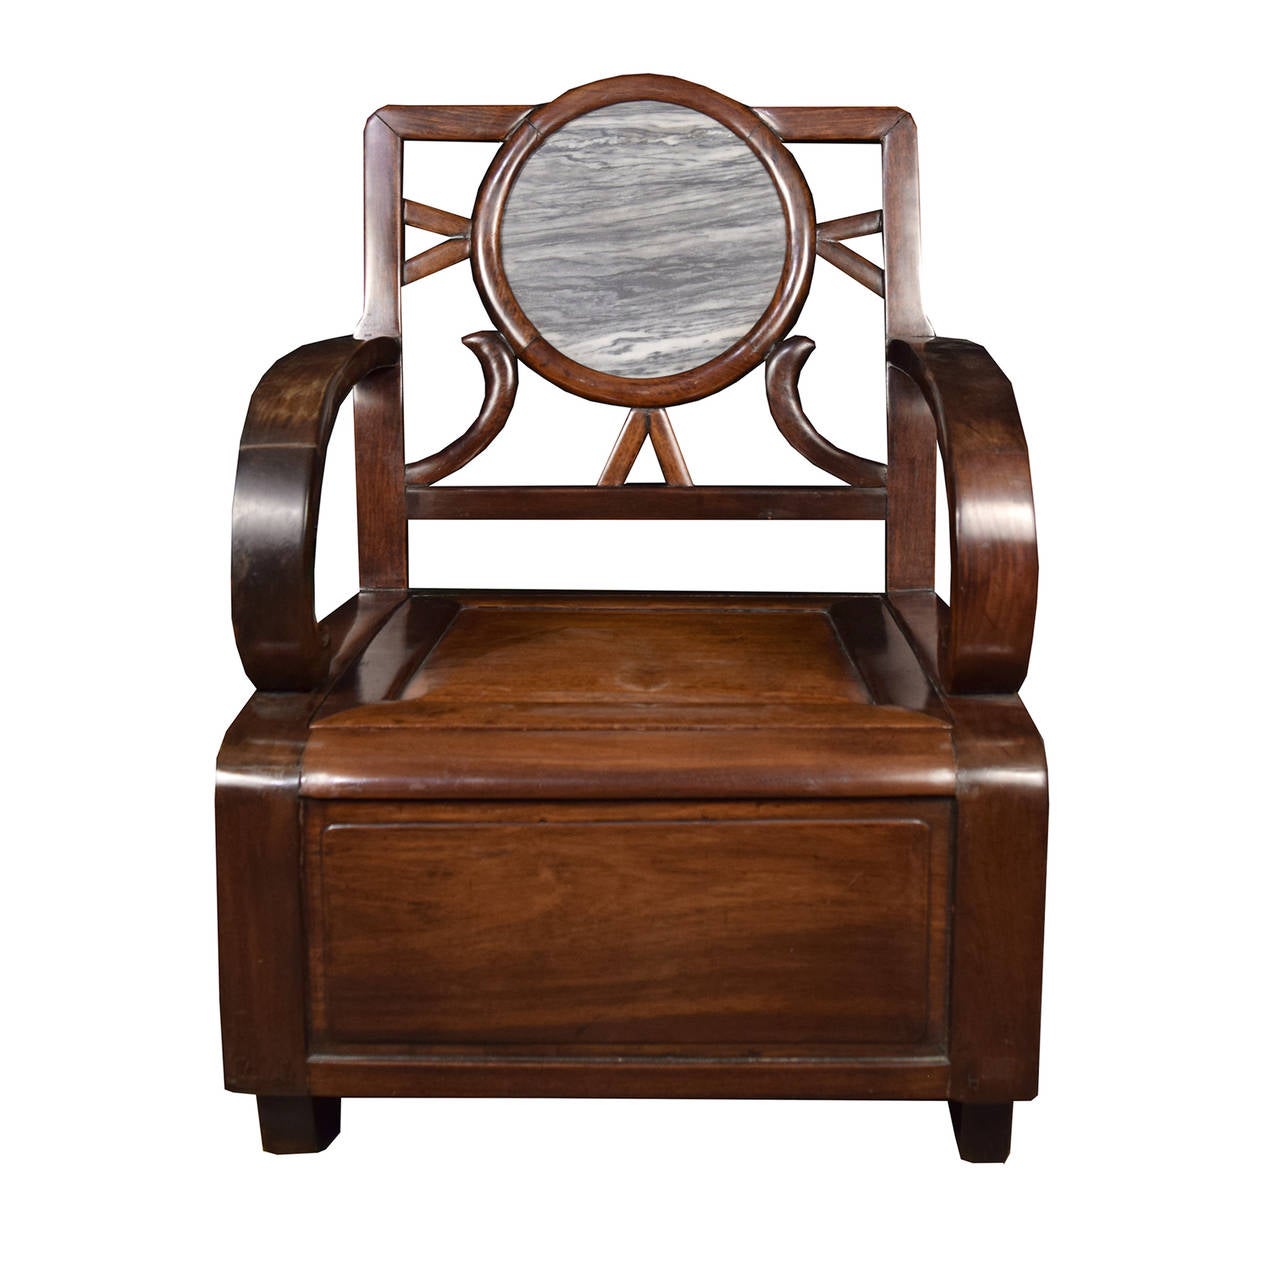 A Chinese Deco chair from c. 1920 with curved arms and a detailed back with a stone medallion.